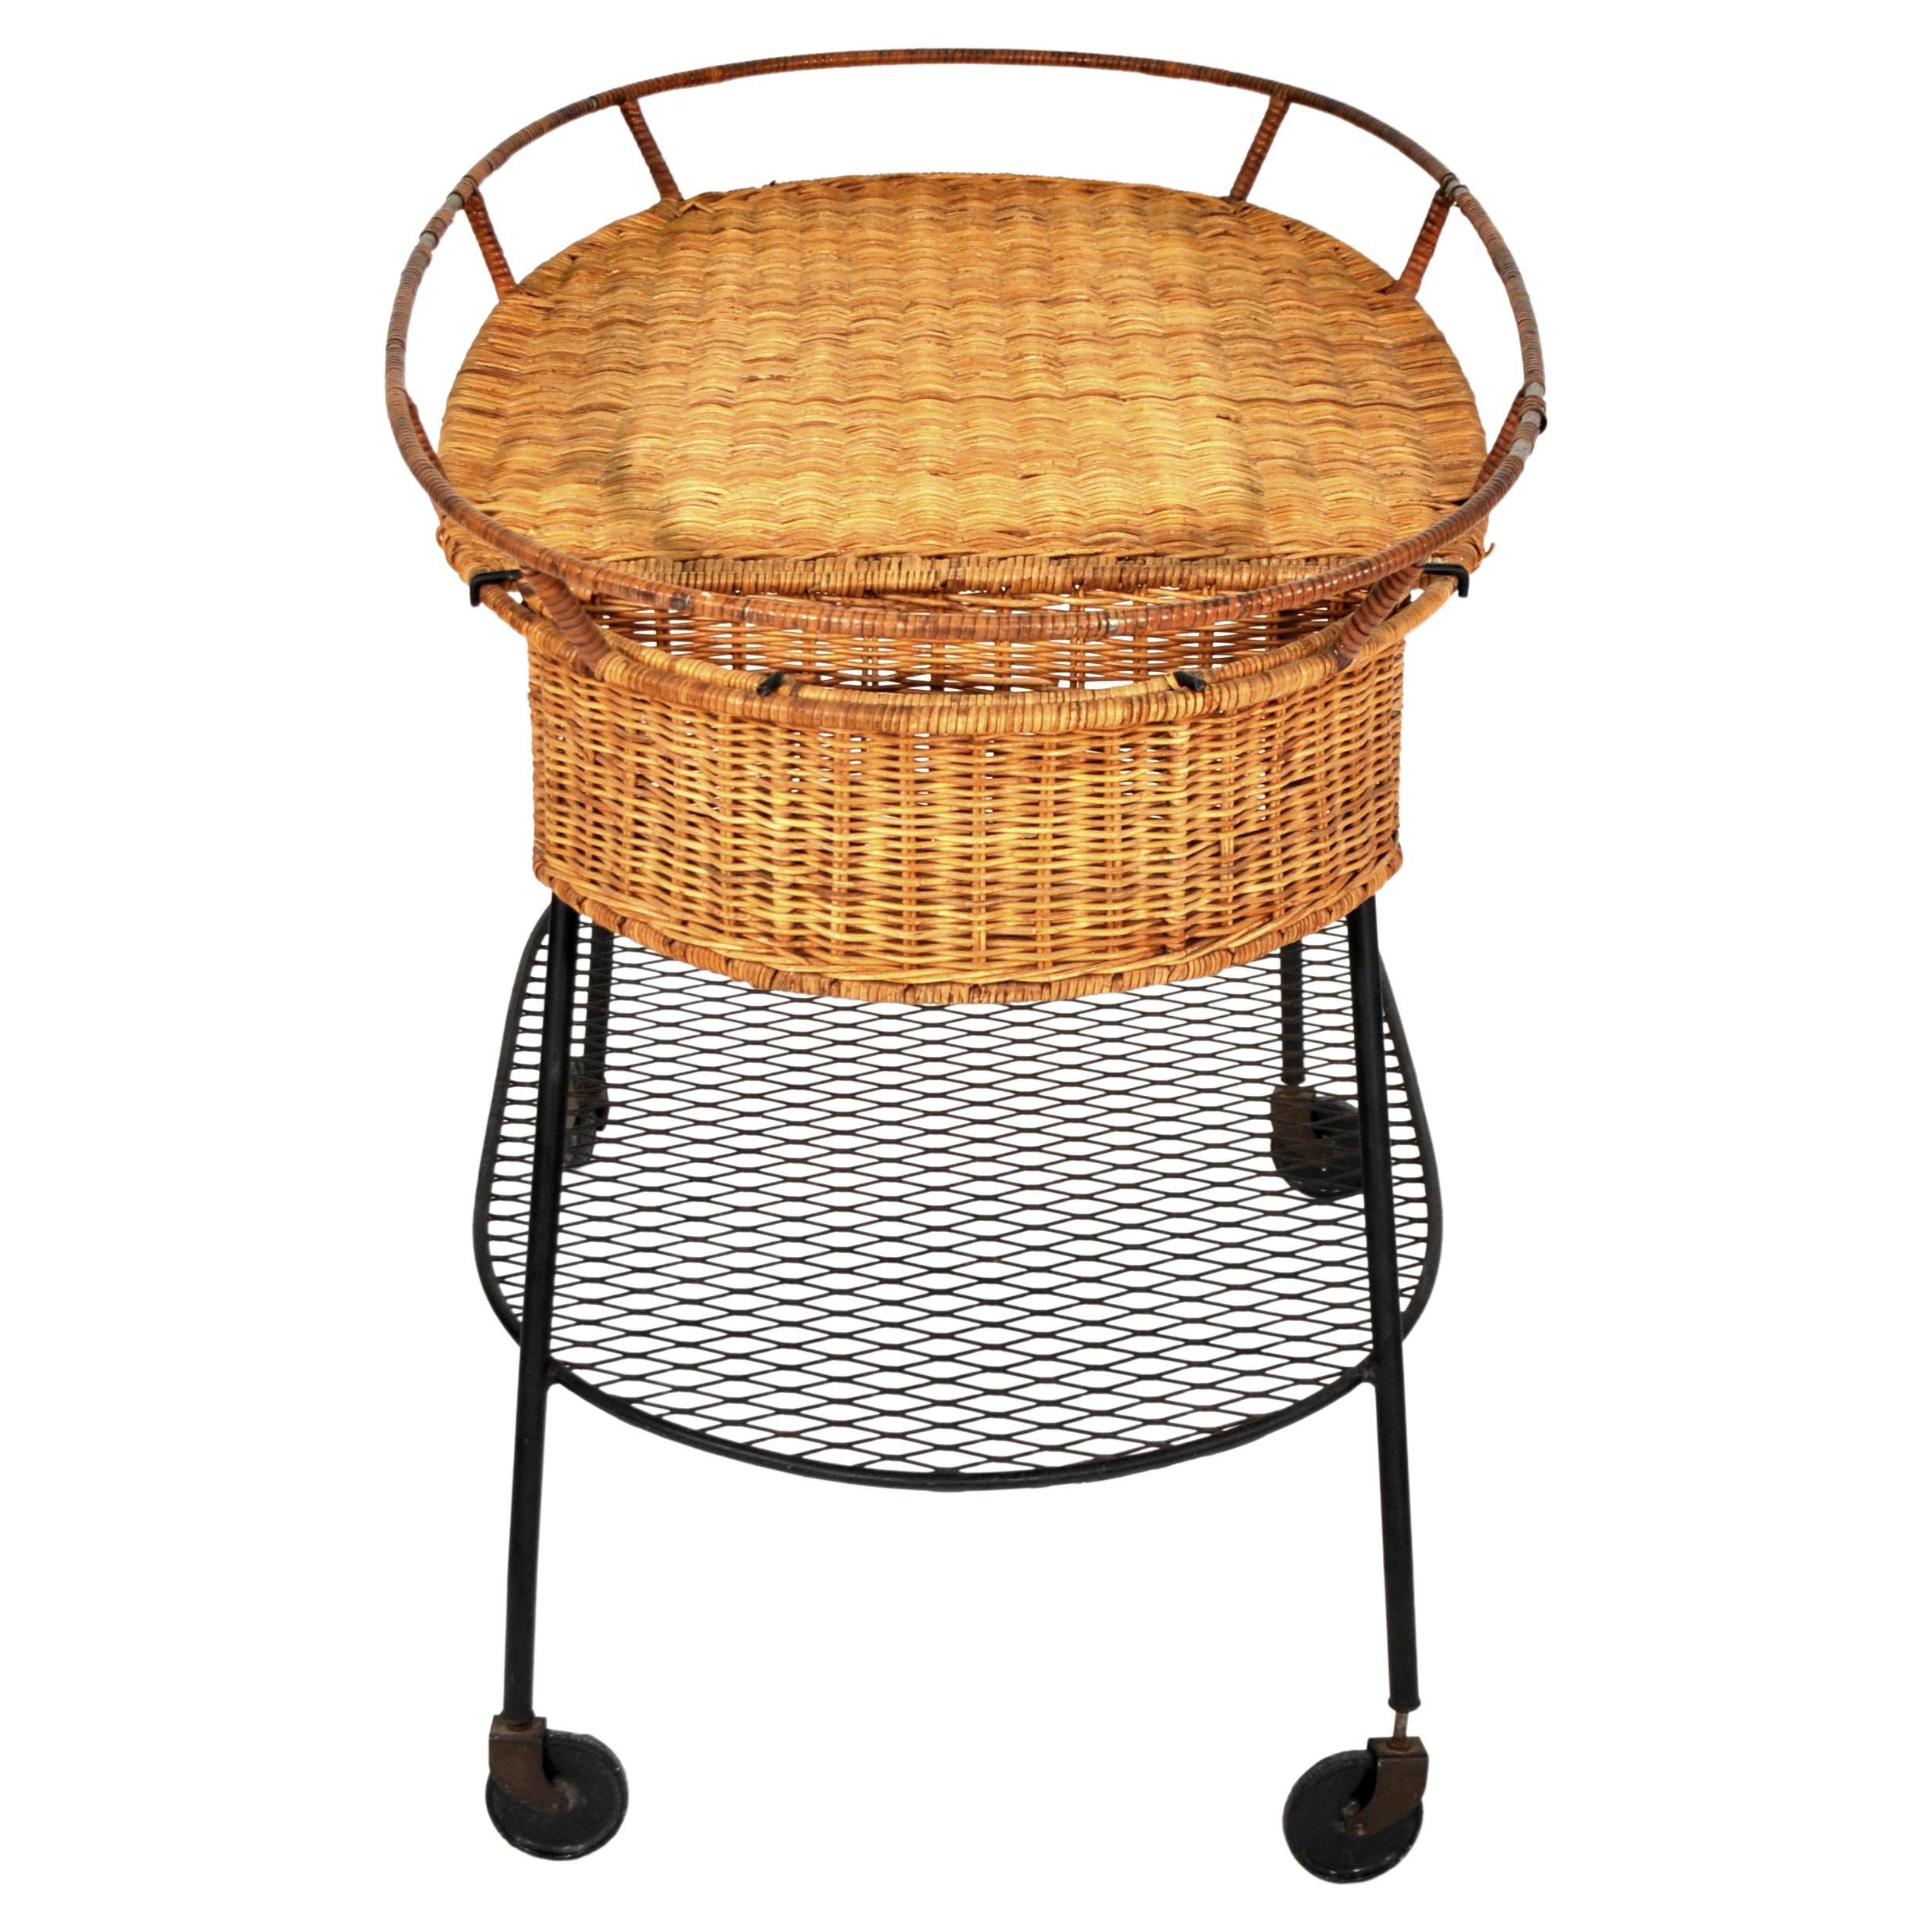 Vintage Mid-Century Modern wicker and wrought iron rolling bar cart attributed to Arthur Umanoff. The indoor/outdoor two-tiered serving trolley features a woven rattan top with a removable basket, a black iron lower tier, and a wrought iron frame